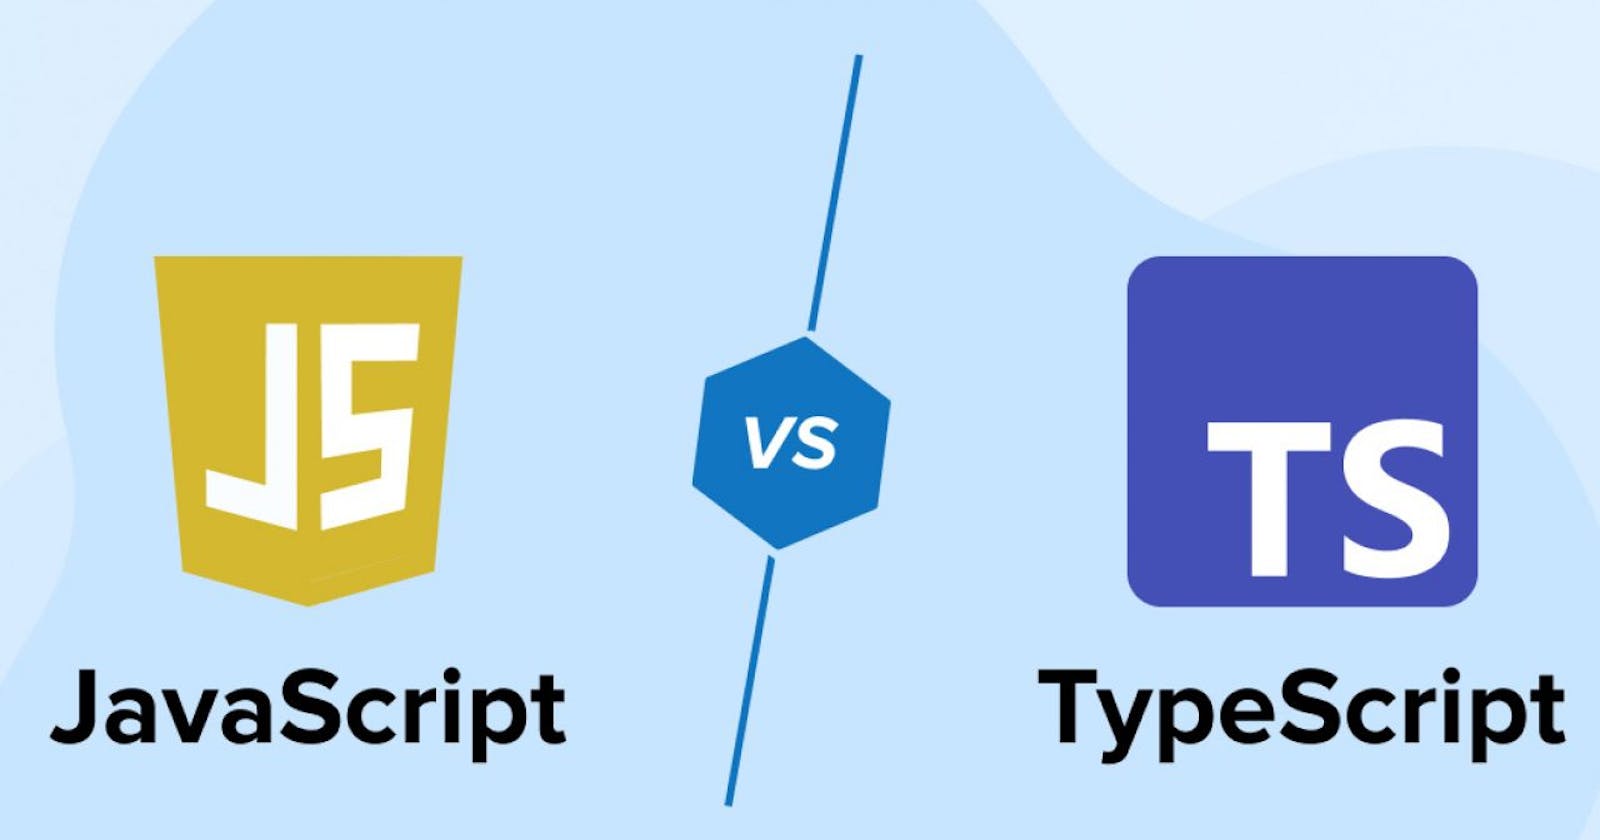 I hate Typescript, is it a shame?